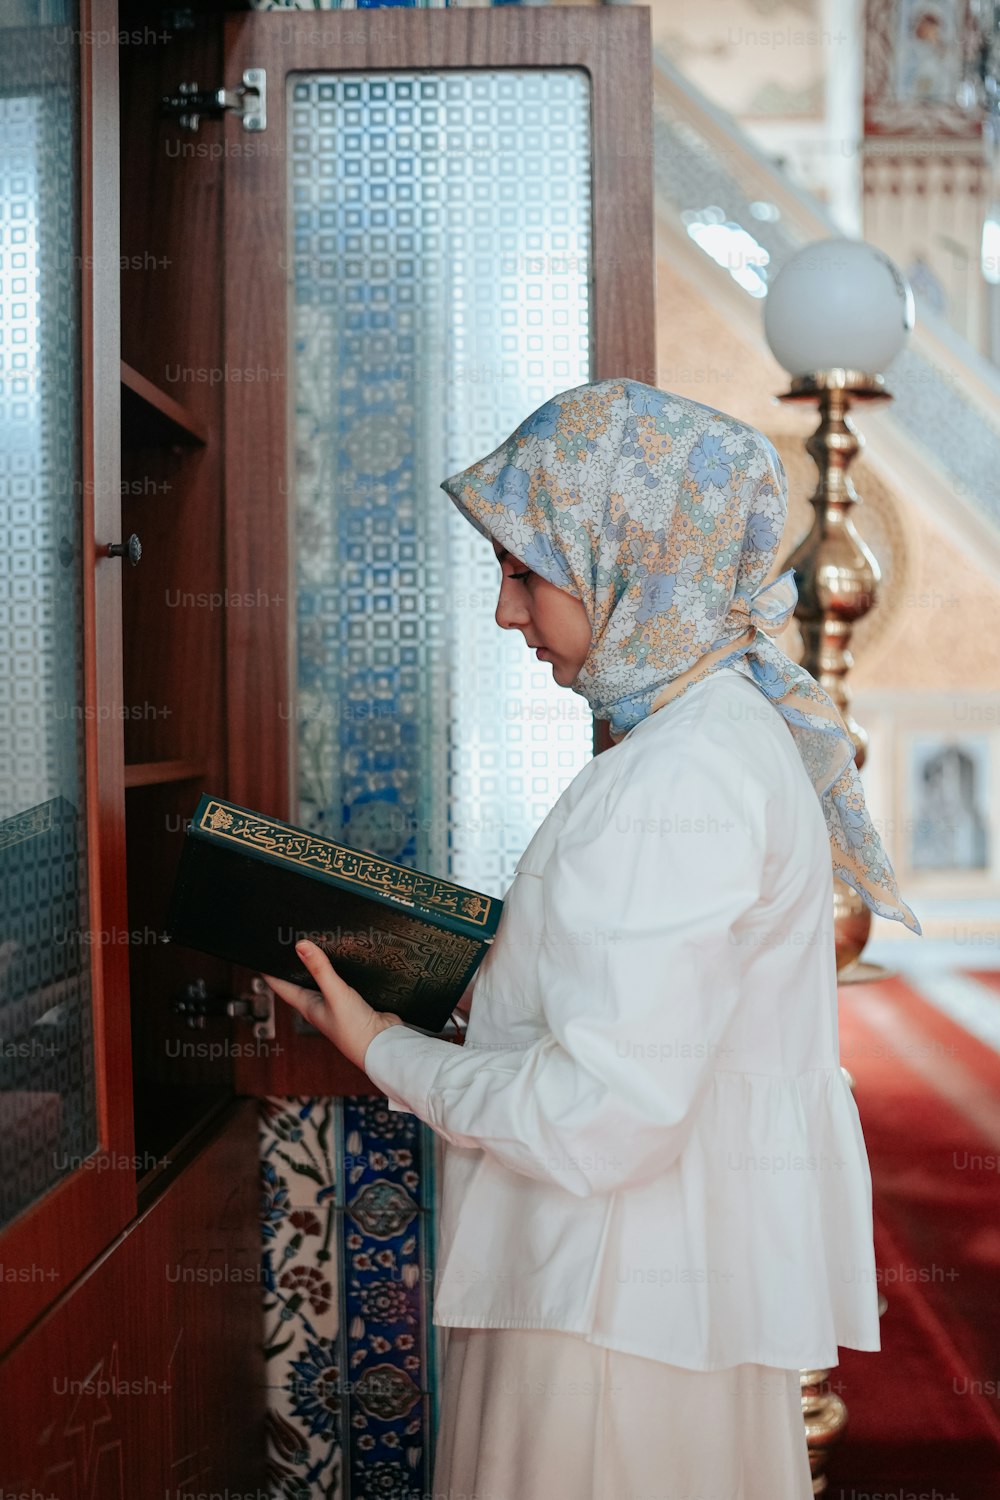 a woman in a headscarf is reading a book